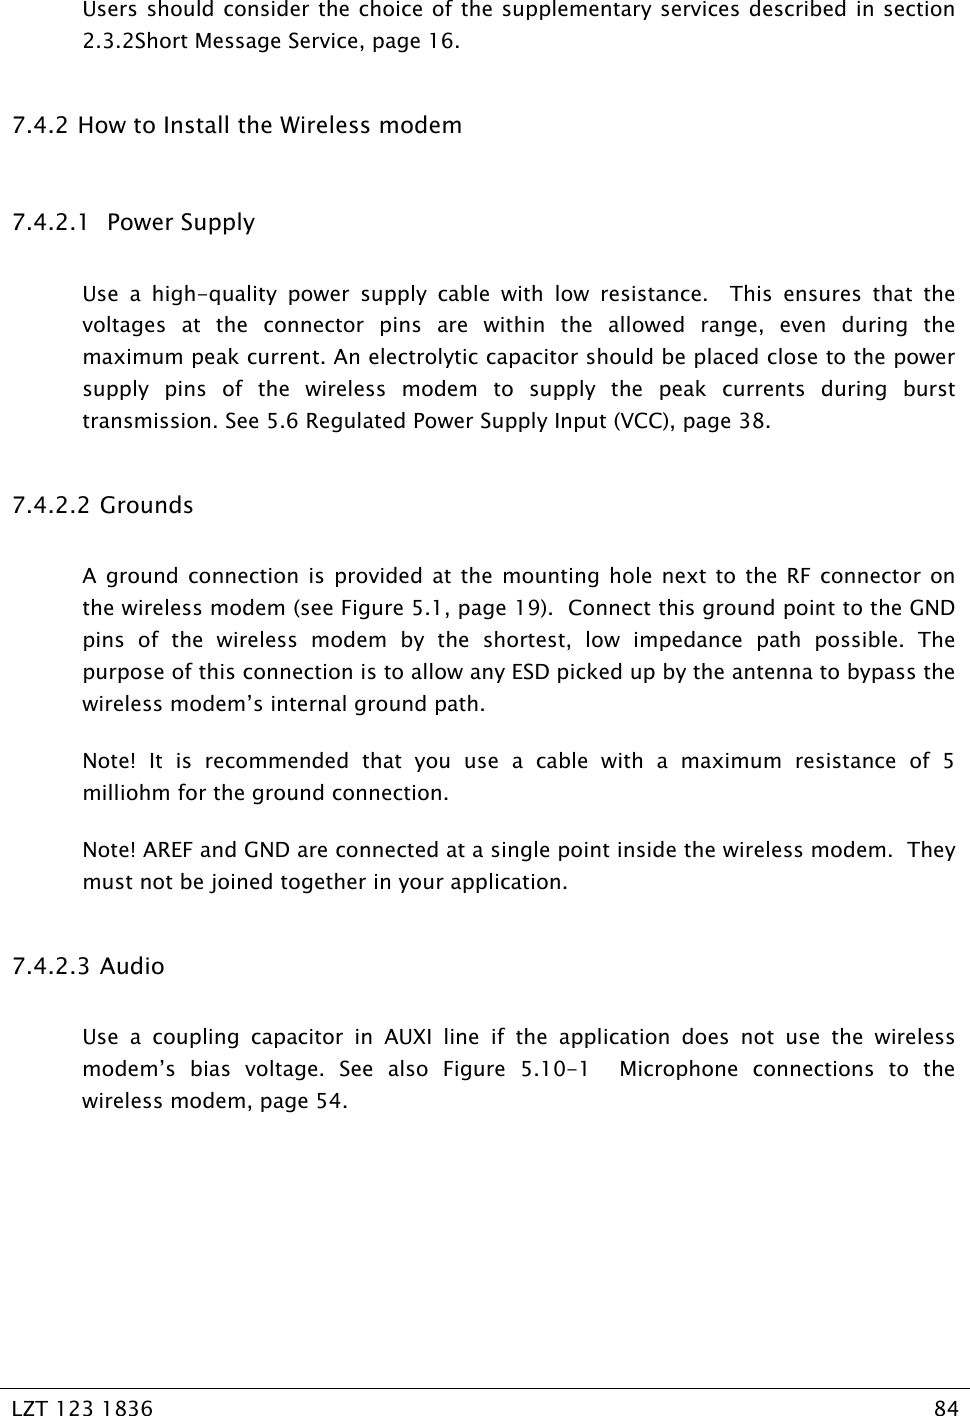   LZT 123 1836  84   Users should consider the choice of the supplementary services described in section 2.3.2Short Message Service, page 16. 7.4.2  How to Install the Wireless modem 7.4.2.1  Power Supply Use a high-quality power supply cable with low resistance.  This ensures that the voltages at the connector pins are within the allowed range, even during the maximum peak current. An electrolytic capacitor should be placed close to the power supply pins of the wireless modem to supply the peak currents during burst transmission. See 5.6 Regulated Power Supply Input (VCC), page 38. 7.4.2.2 Grounds A ground connection is provided at the mounting hole next to the RF connector on the wireless modem (see Figure 5.1, page 19).  Connect this ground point to the GND pins of the wireless modem by the shortest, low impedance path possible. The purpose of this connection is to allow any ESD picked up by the antenna to bypass the wireless modem’s internal ground path. Note! It is recommended that you use a cable with a maximum resistance of 5 milliohm for the ground connection. Note! AREF and GND are connected at a single point inside the wireless modem.  They must not be joined together in your application. 7.4.2.3 Audio Use a coupling capacitor in AUXI line if the application does not use the wireless modem’s bias voltage. See also Figure 5.10-1  Microphone connections to the wireless modem, page 54. 